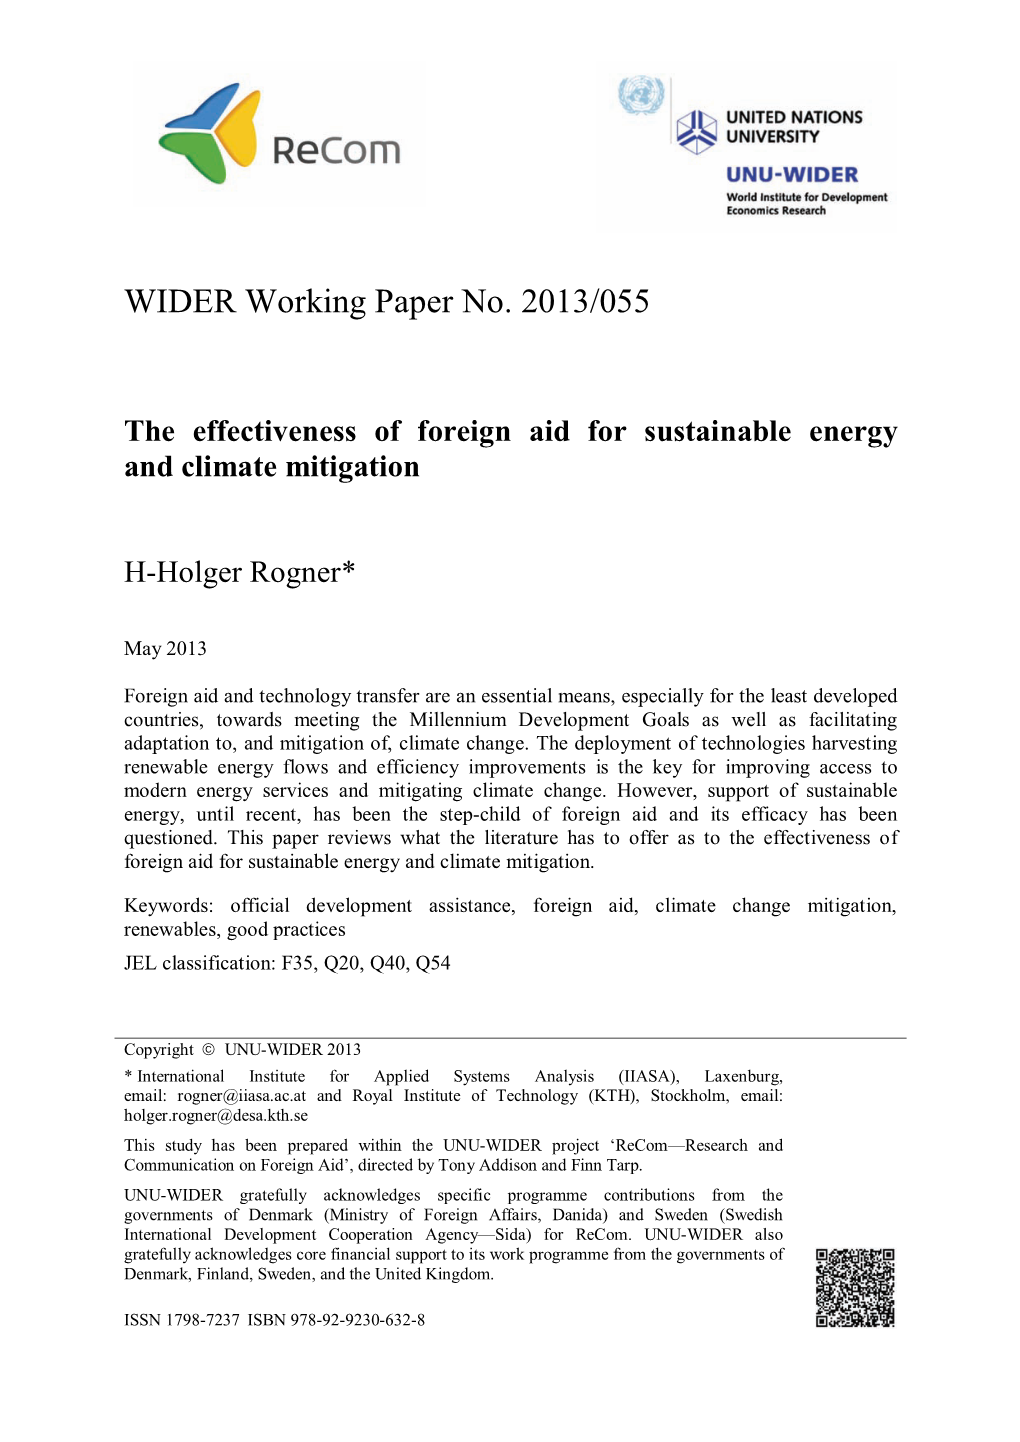 WIDER Working Paper No. 2013/055 the Effectiveness of Foreign Aid For